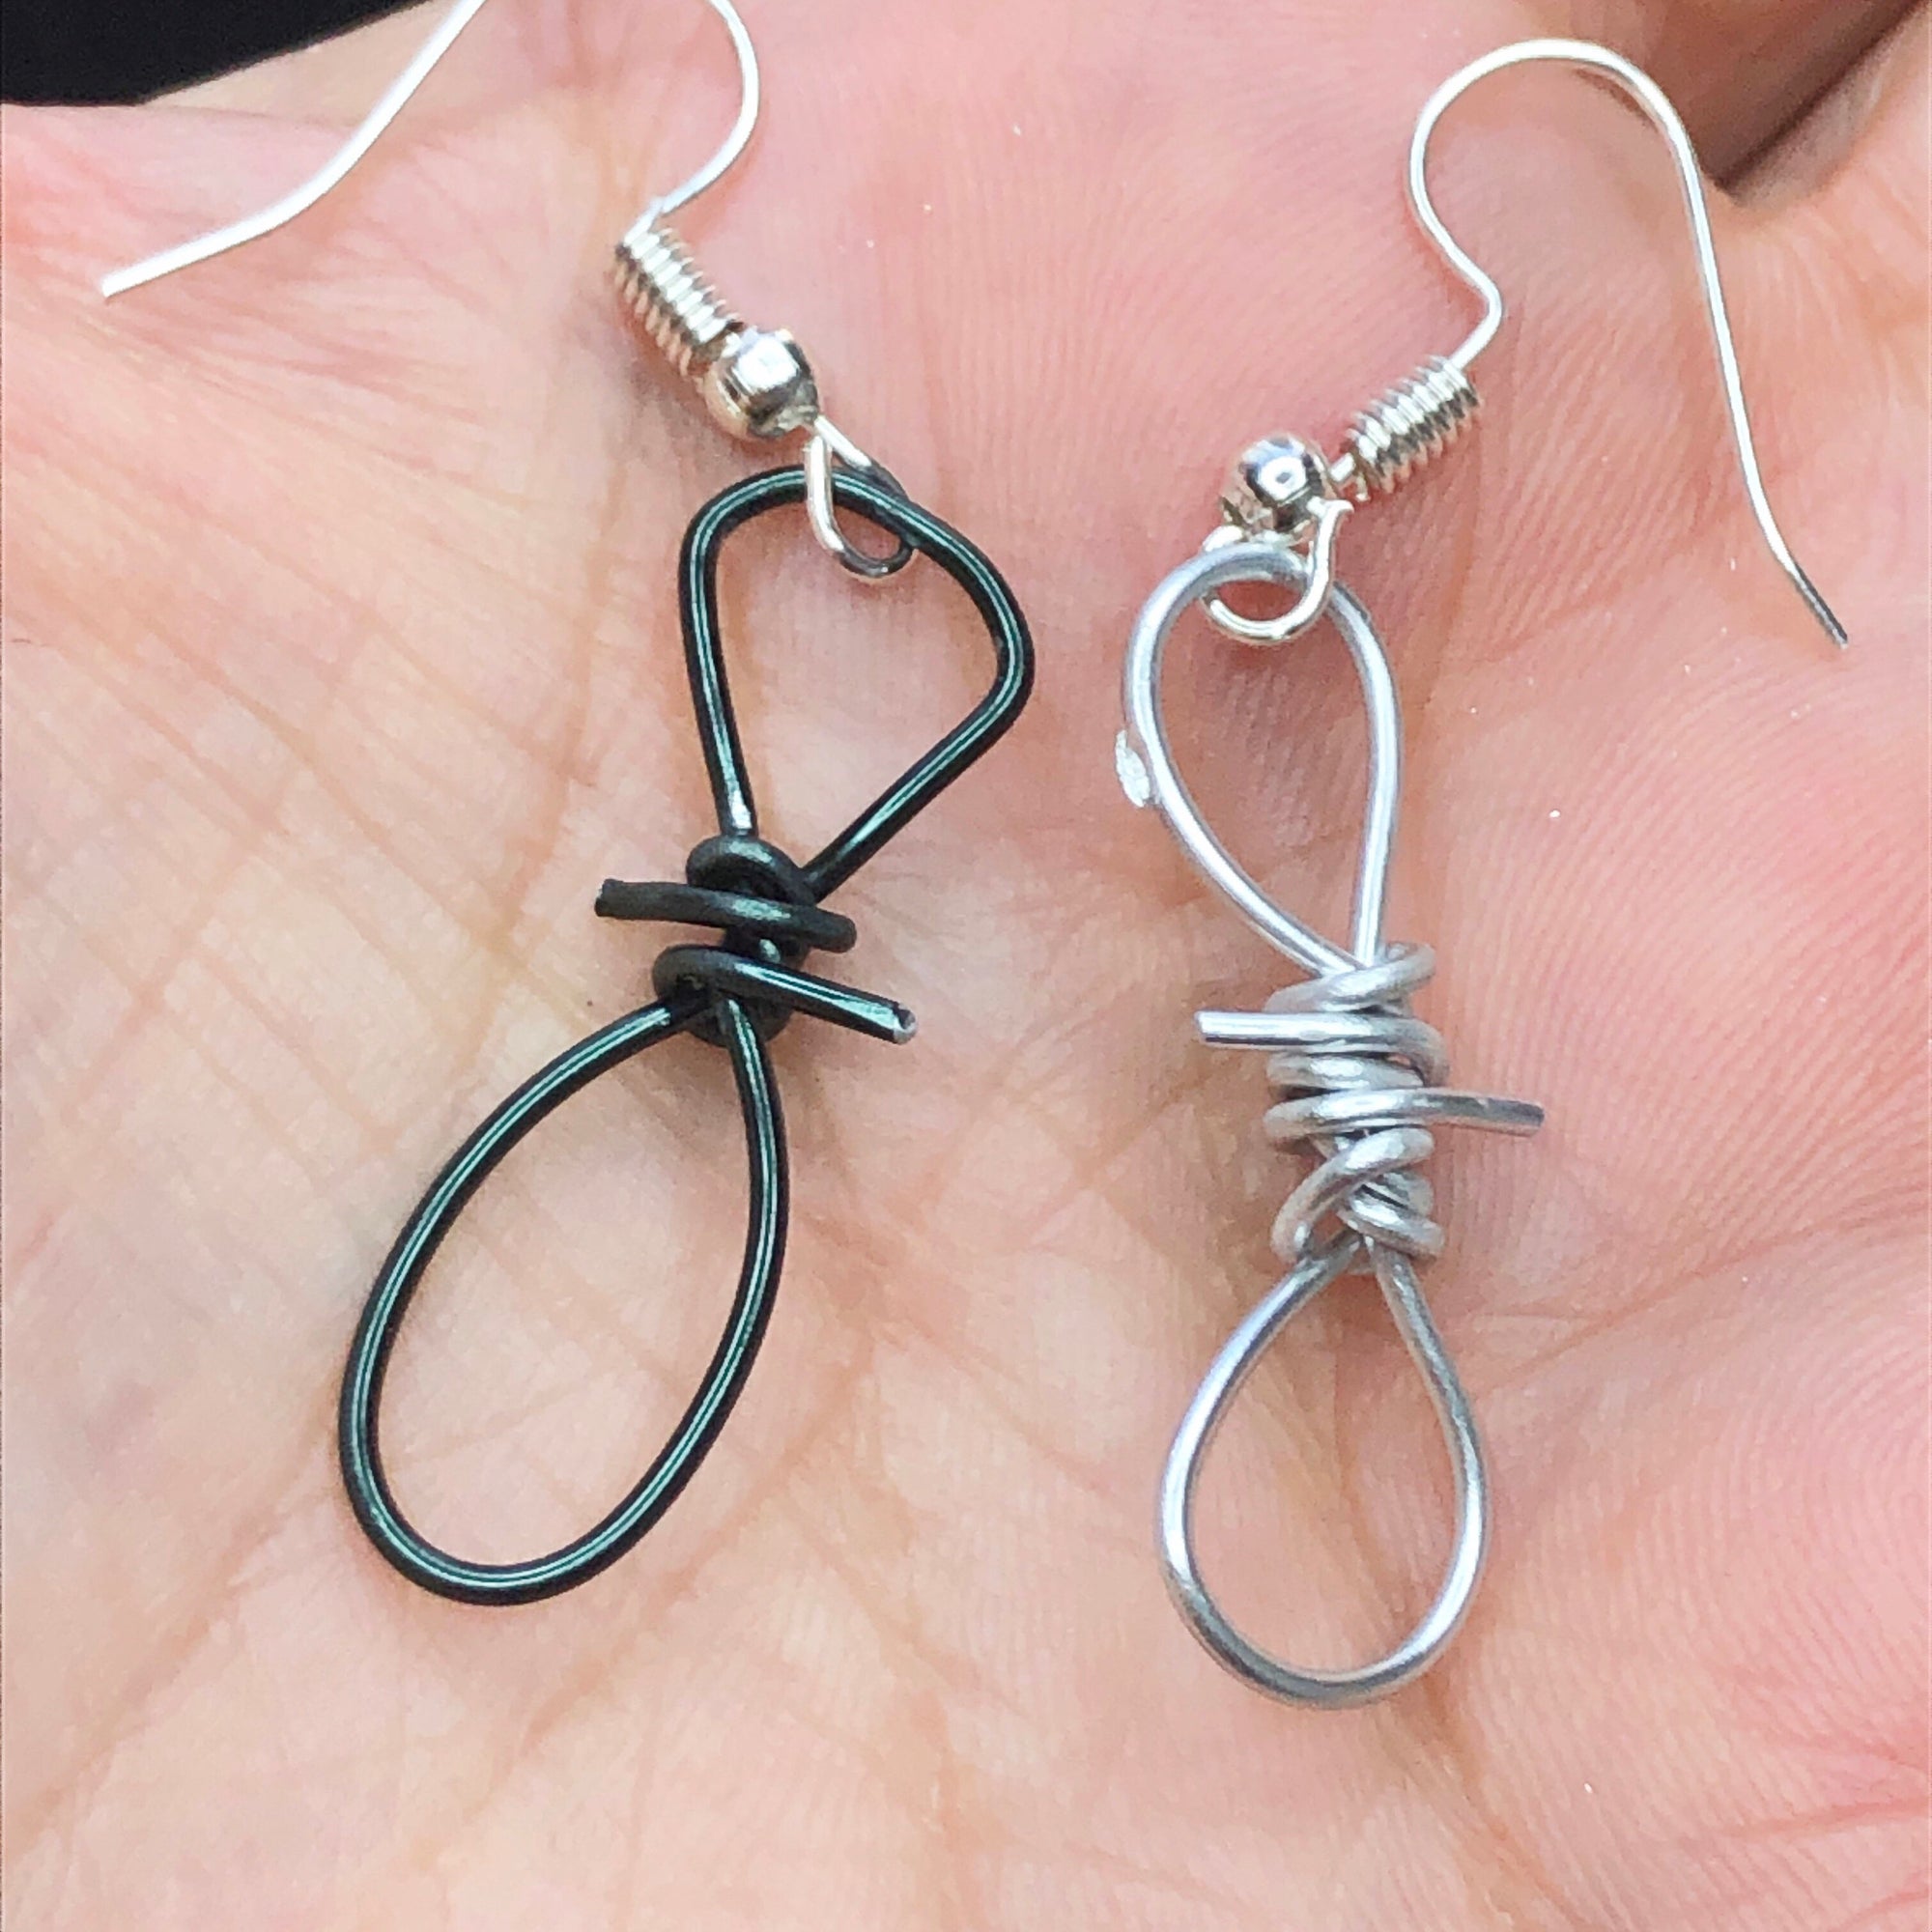 Handmade barbed wire earrings - Barbed jewelry